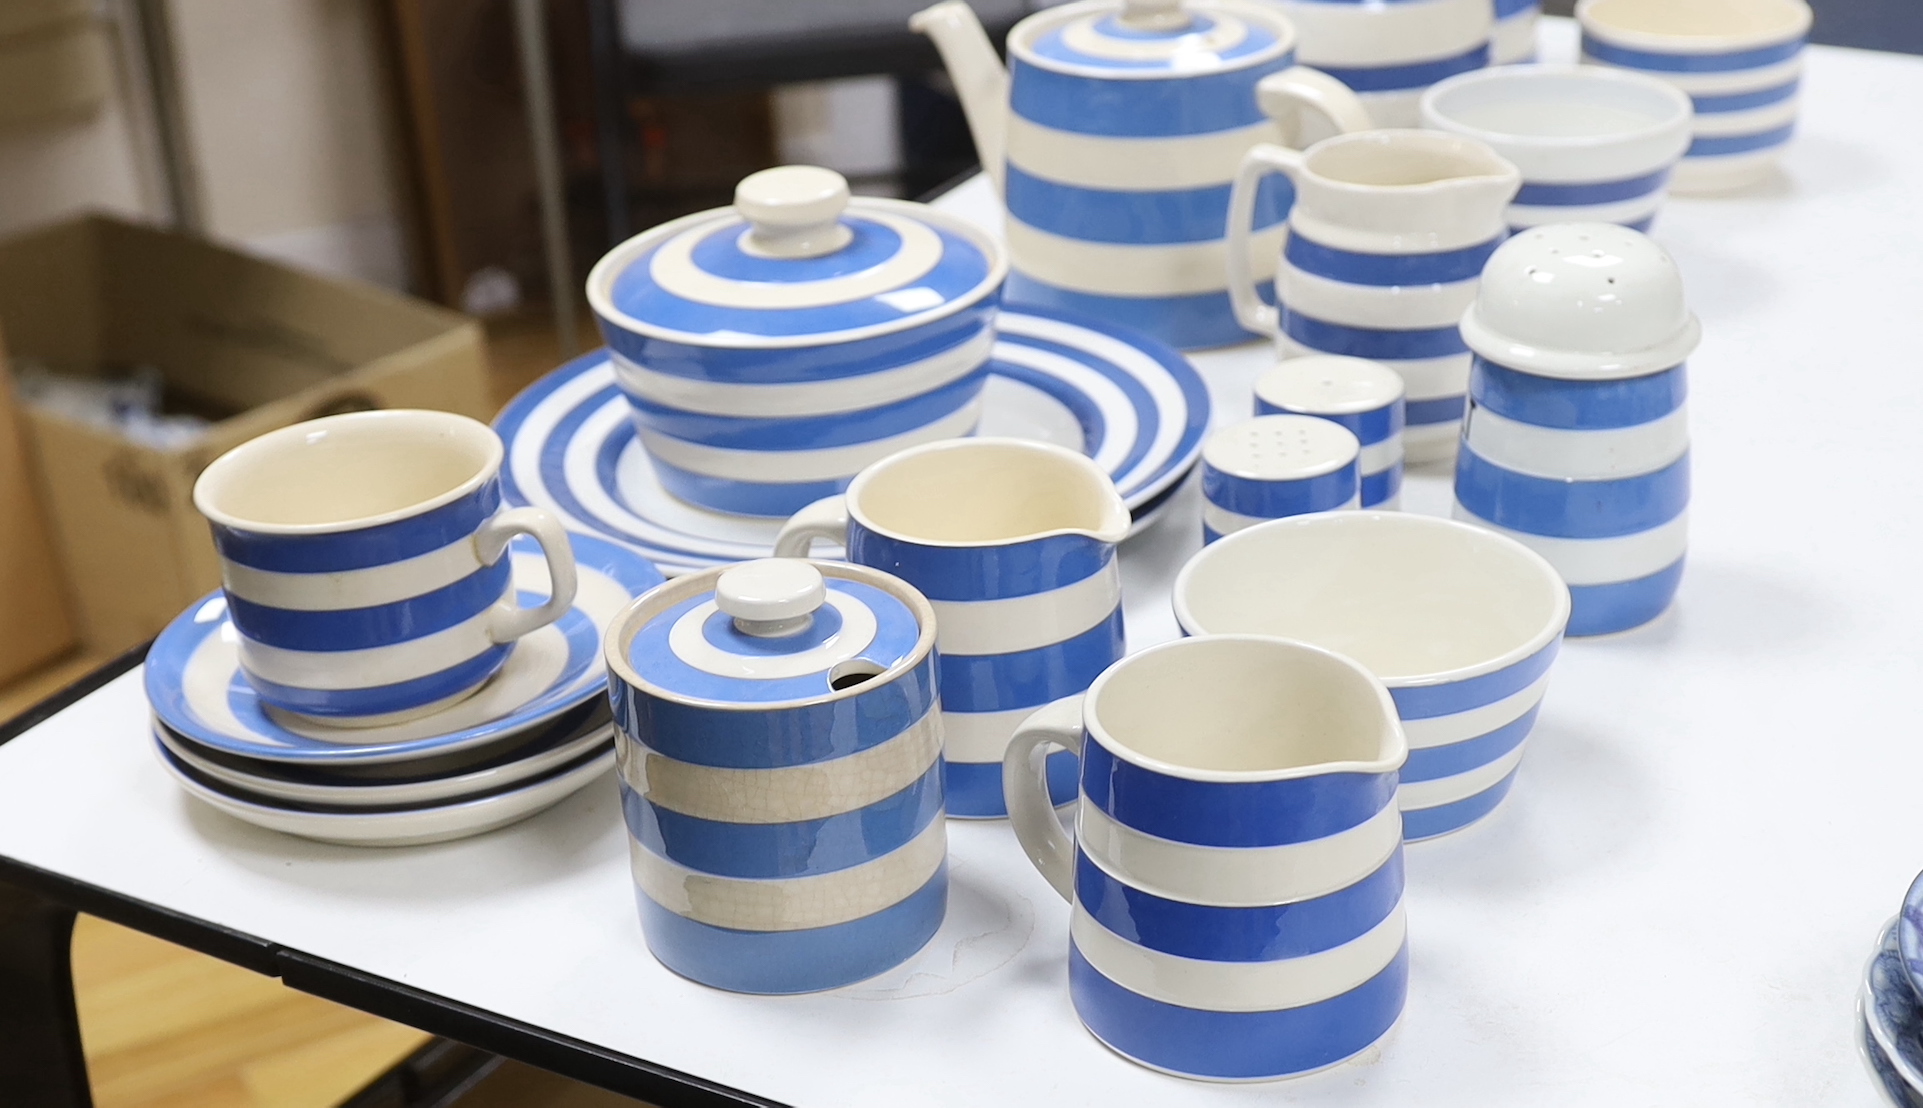 T.G. Green and other Cornishware including; a teapot, two large jugs and three smaller jugs, salt and pepper shakers, plates and bowls, etc. (19)